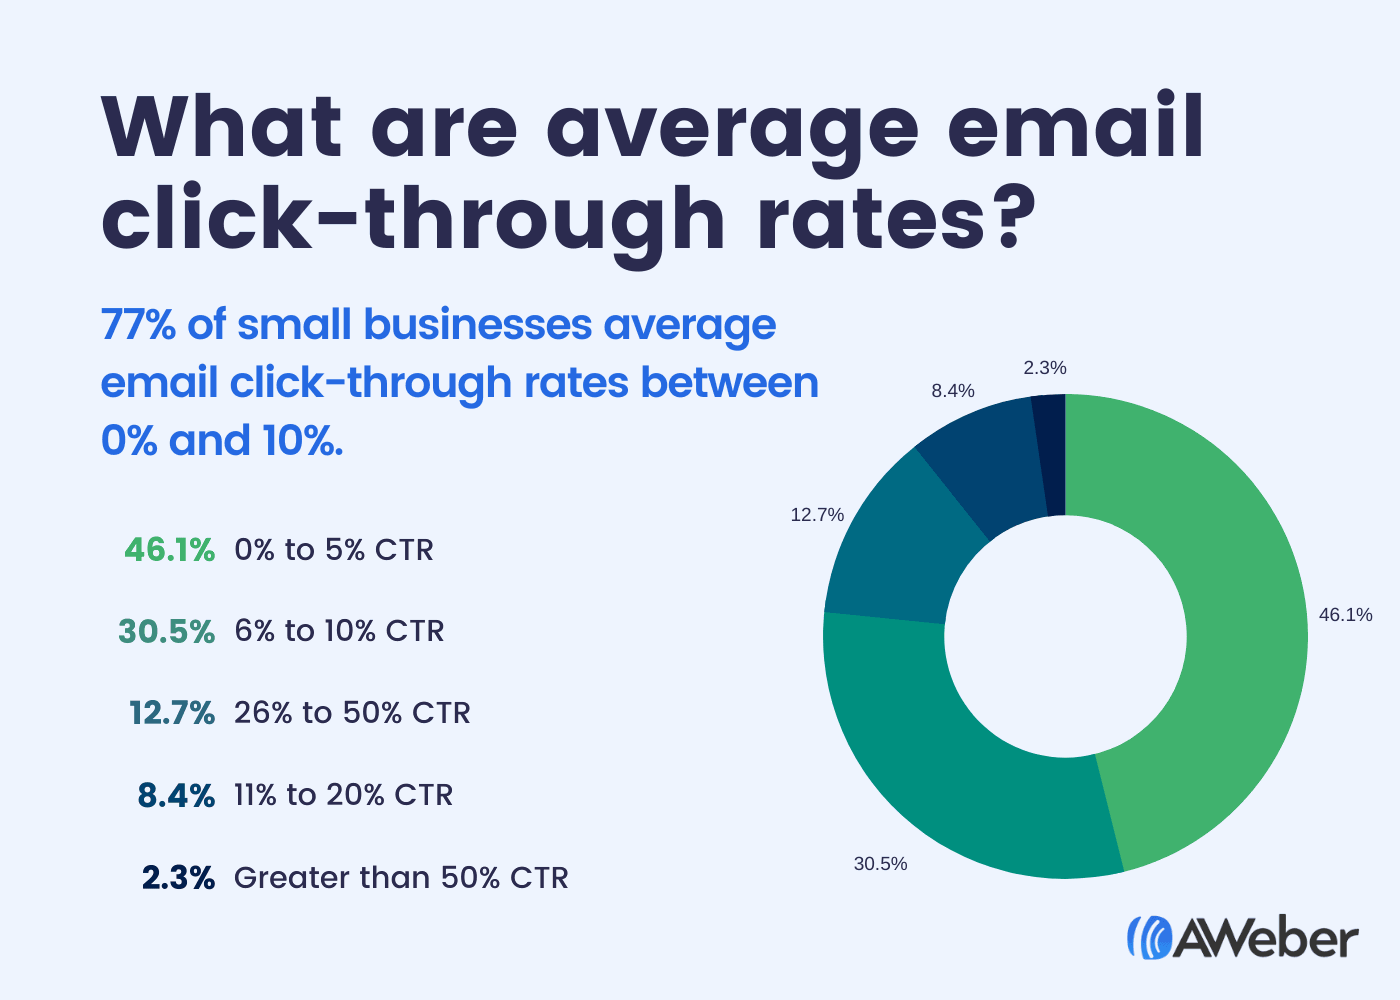 Chart showing average click-through rates: 77% of businesses average email click-through rates between 0% and 10%.